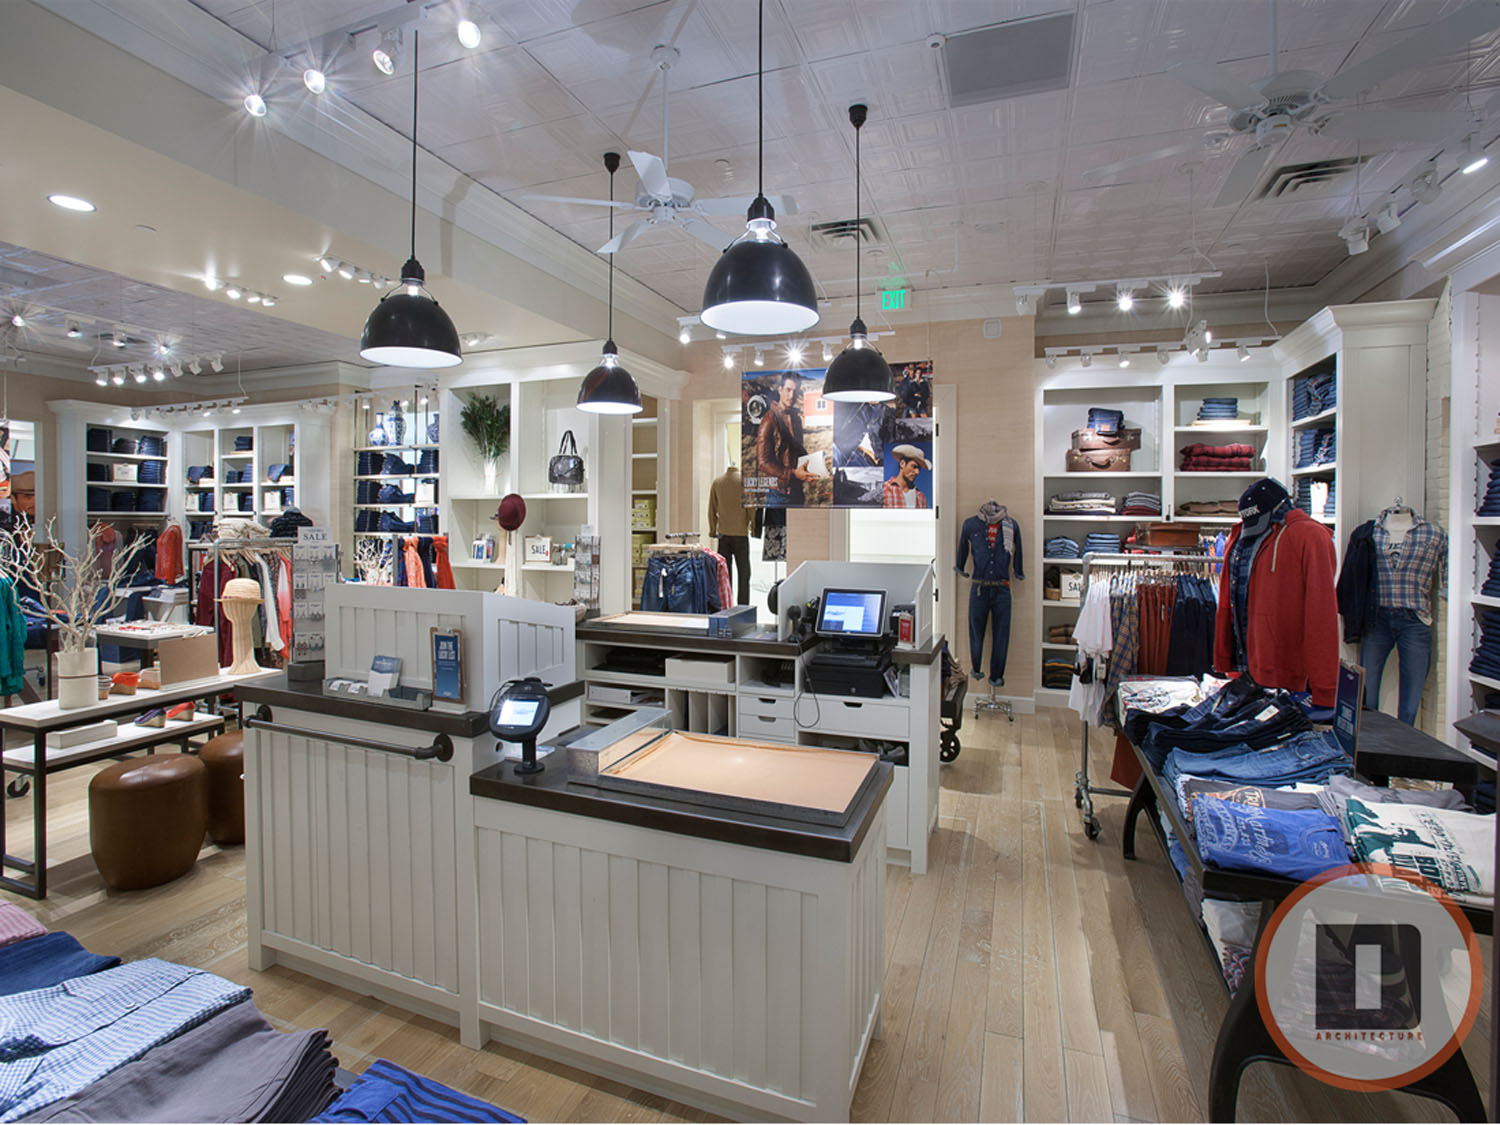 lucky brand retail store